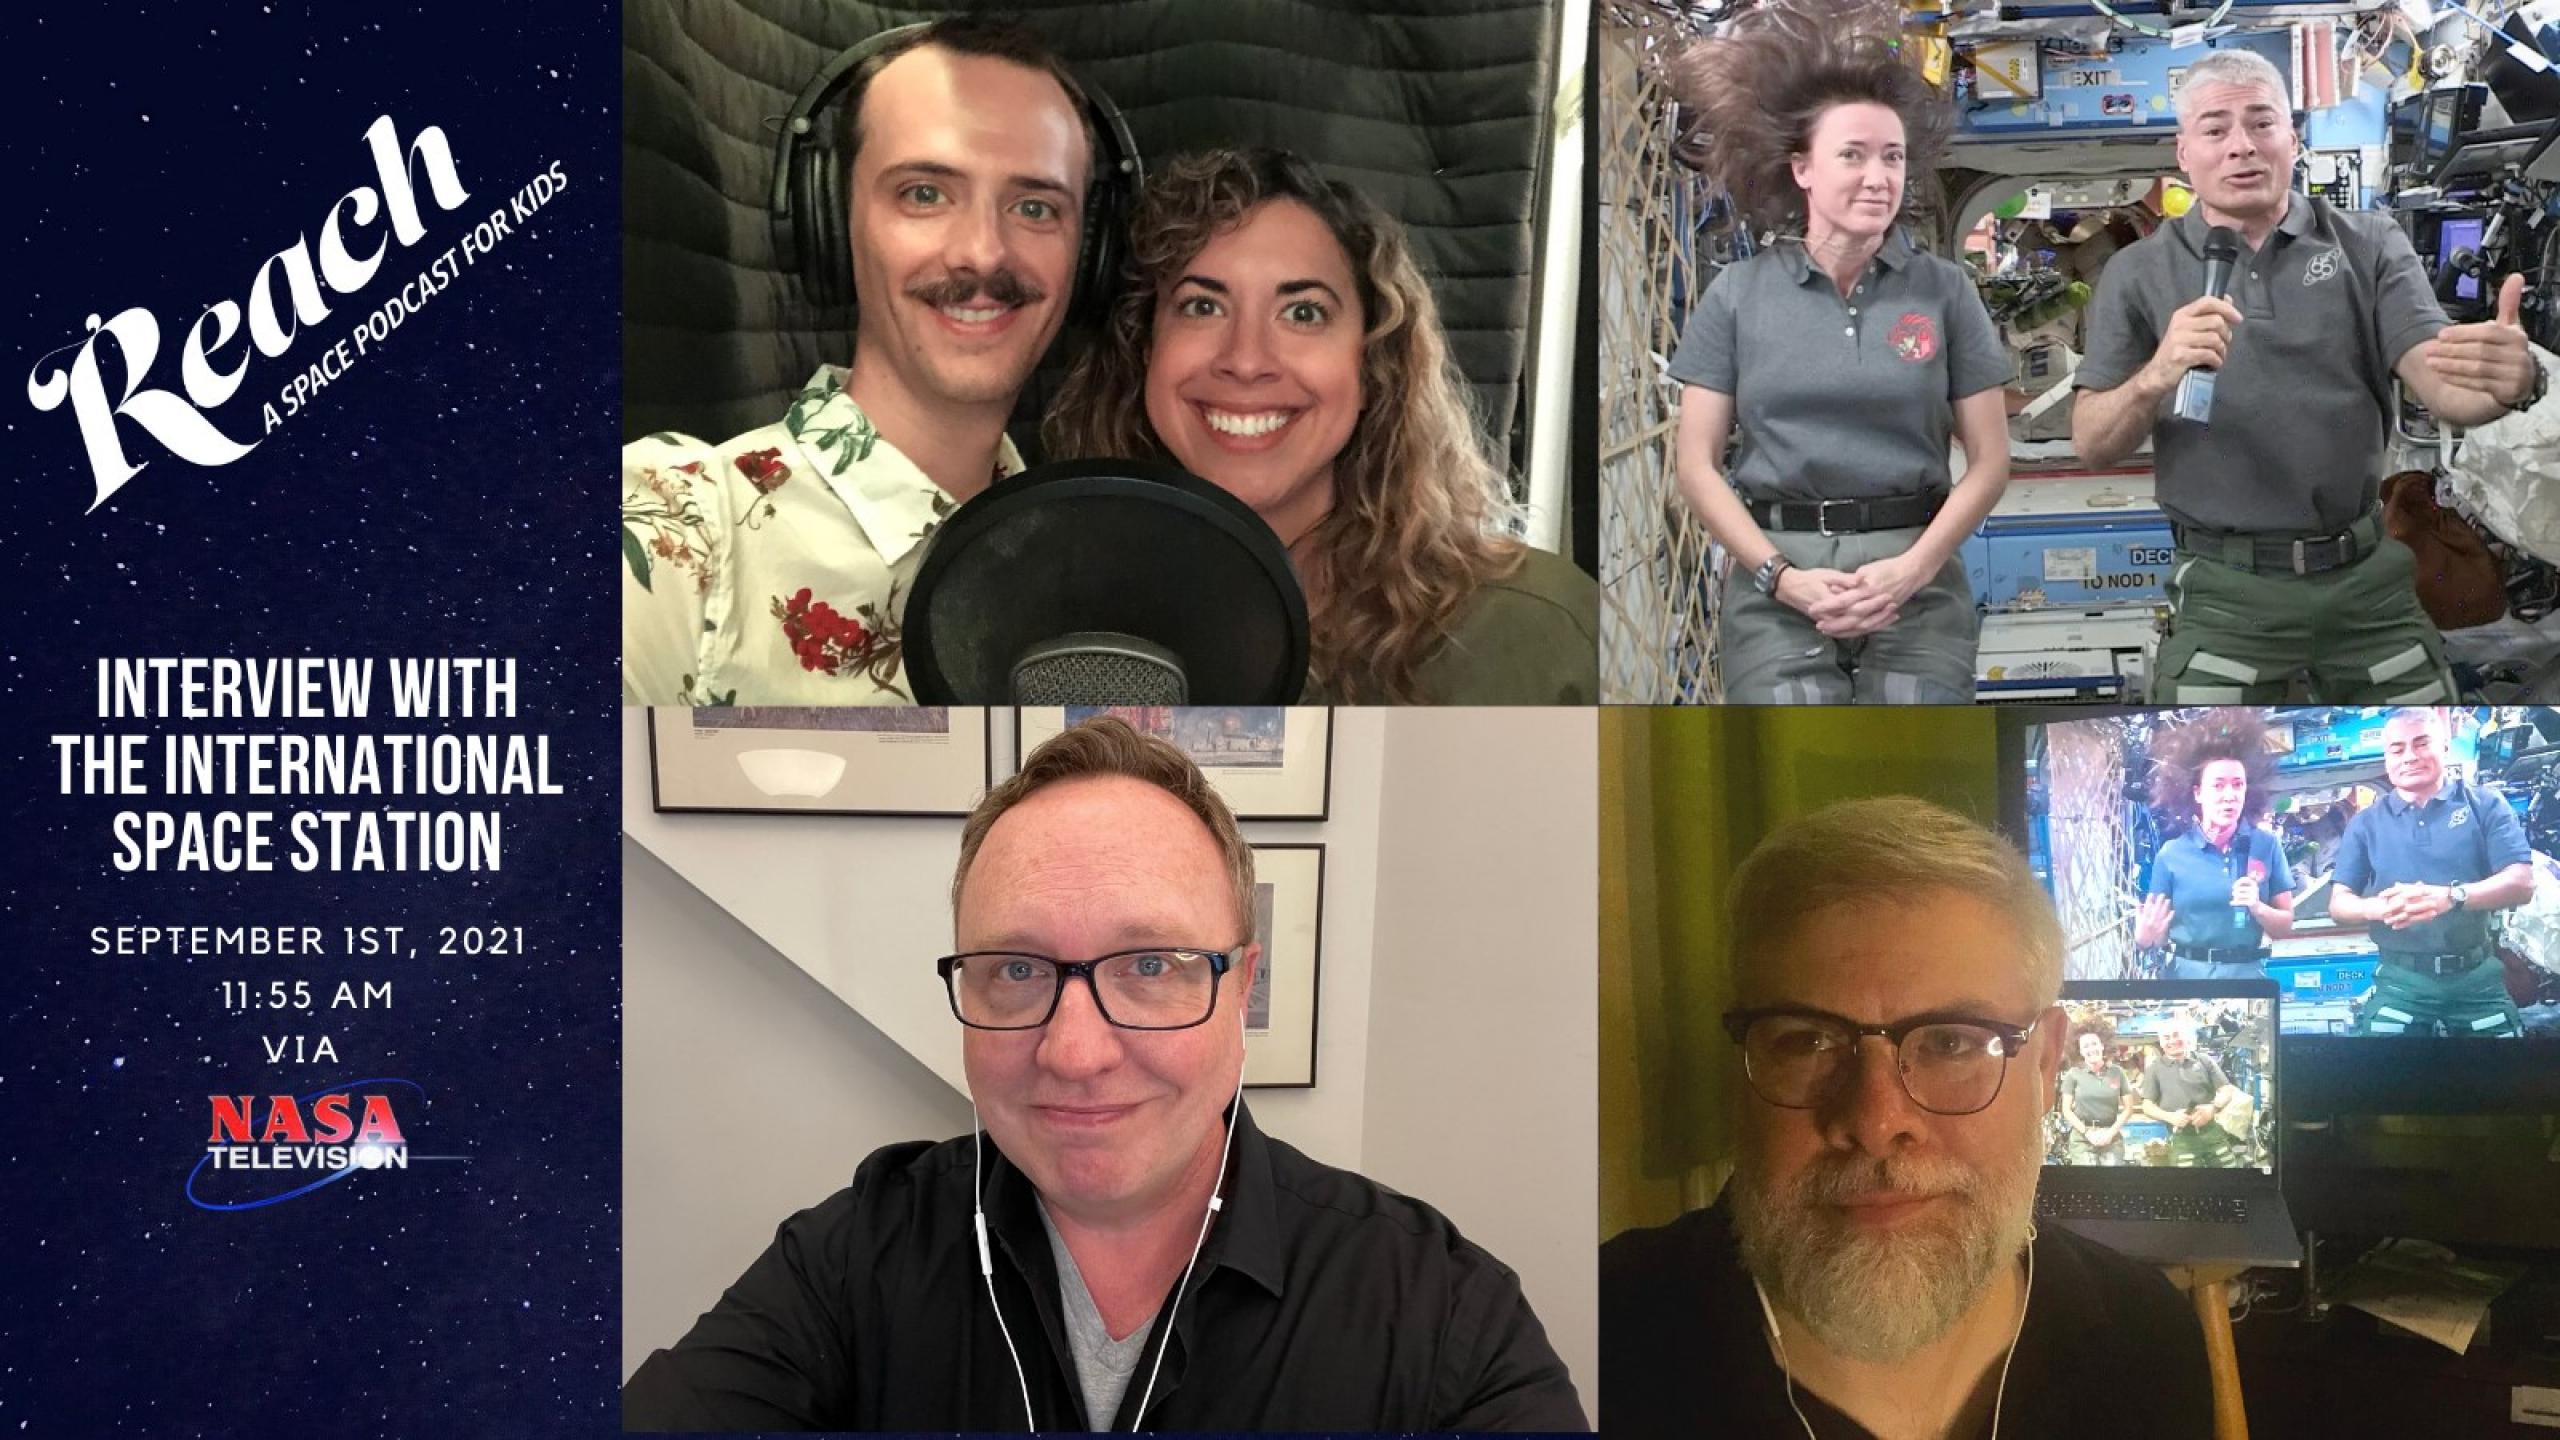 NASA Astronauts Megan McArthur and Mark Vande Hei join an episode of REACH: A Space Podcast for Kids! (Clockwise from top left corner: co-hosts Brian Holden & Meredith Stepien, NASA Astronauts Megan McArthur & Mark Vande Hei onboard the International Space Station, co-creator Sandy Marshall, and co-creator Nate DuFort).